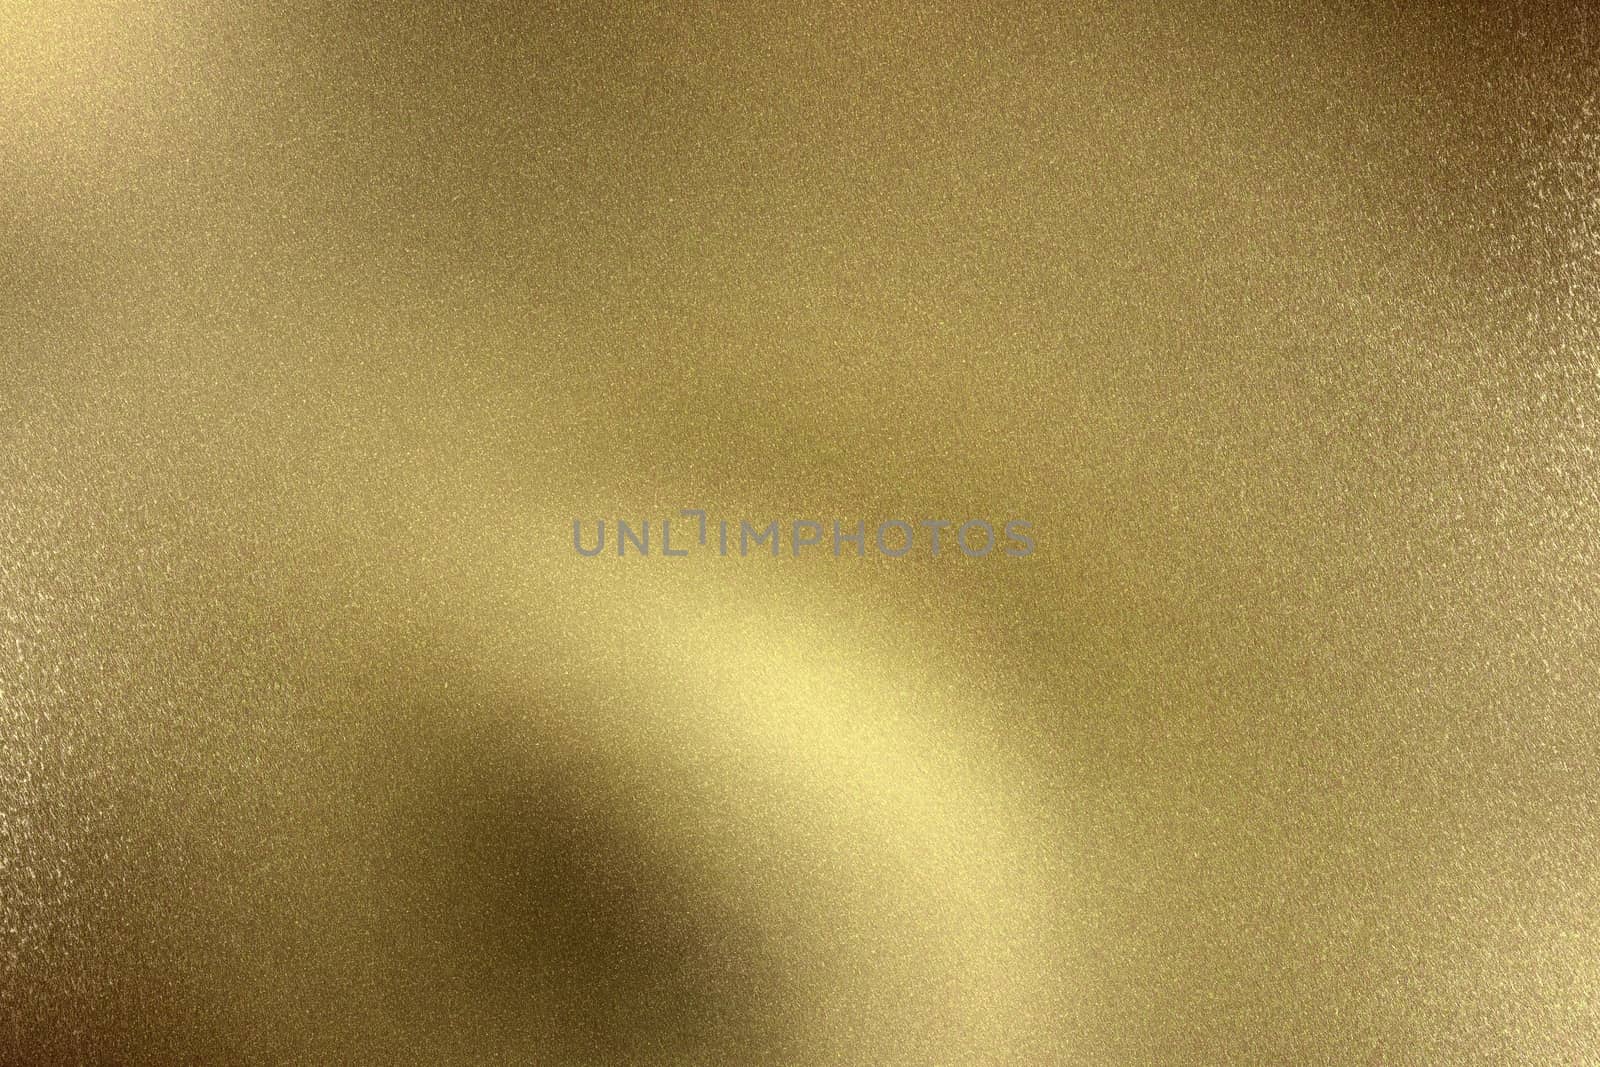 Glowing gold wave metal plate, abstract texture background by mouu007